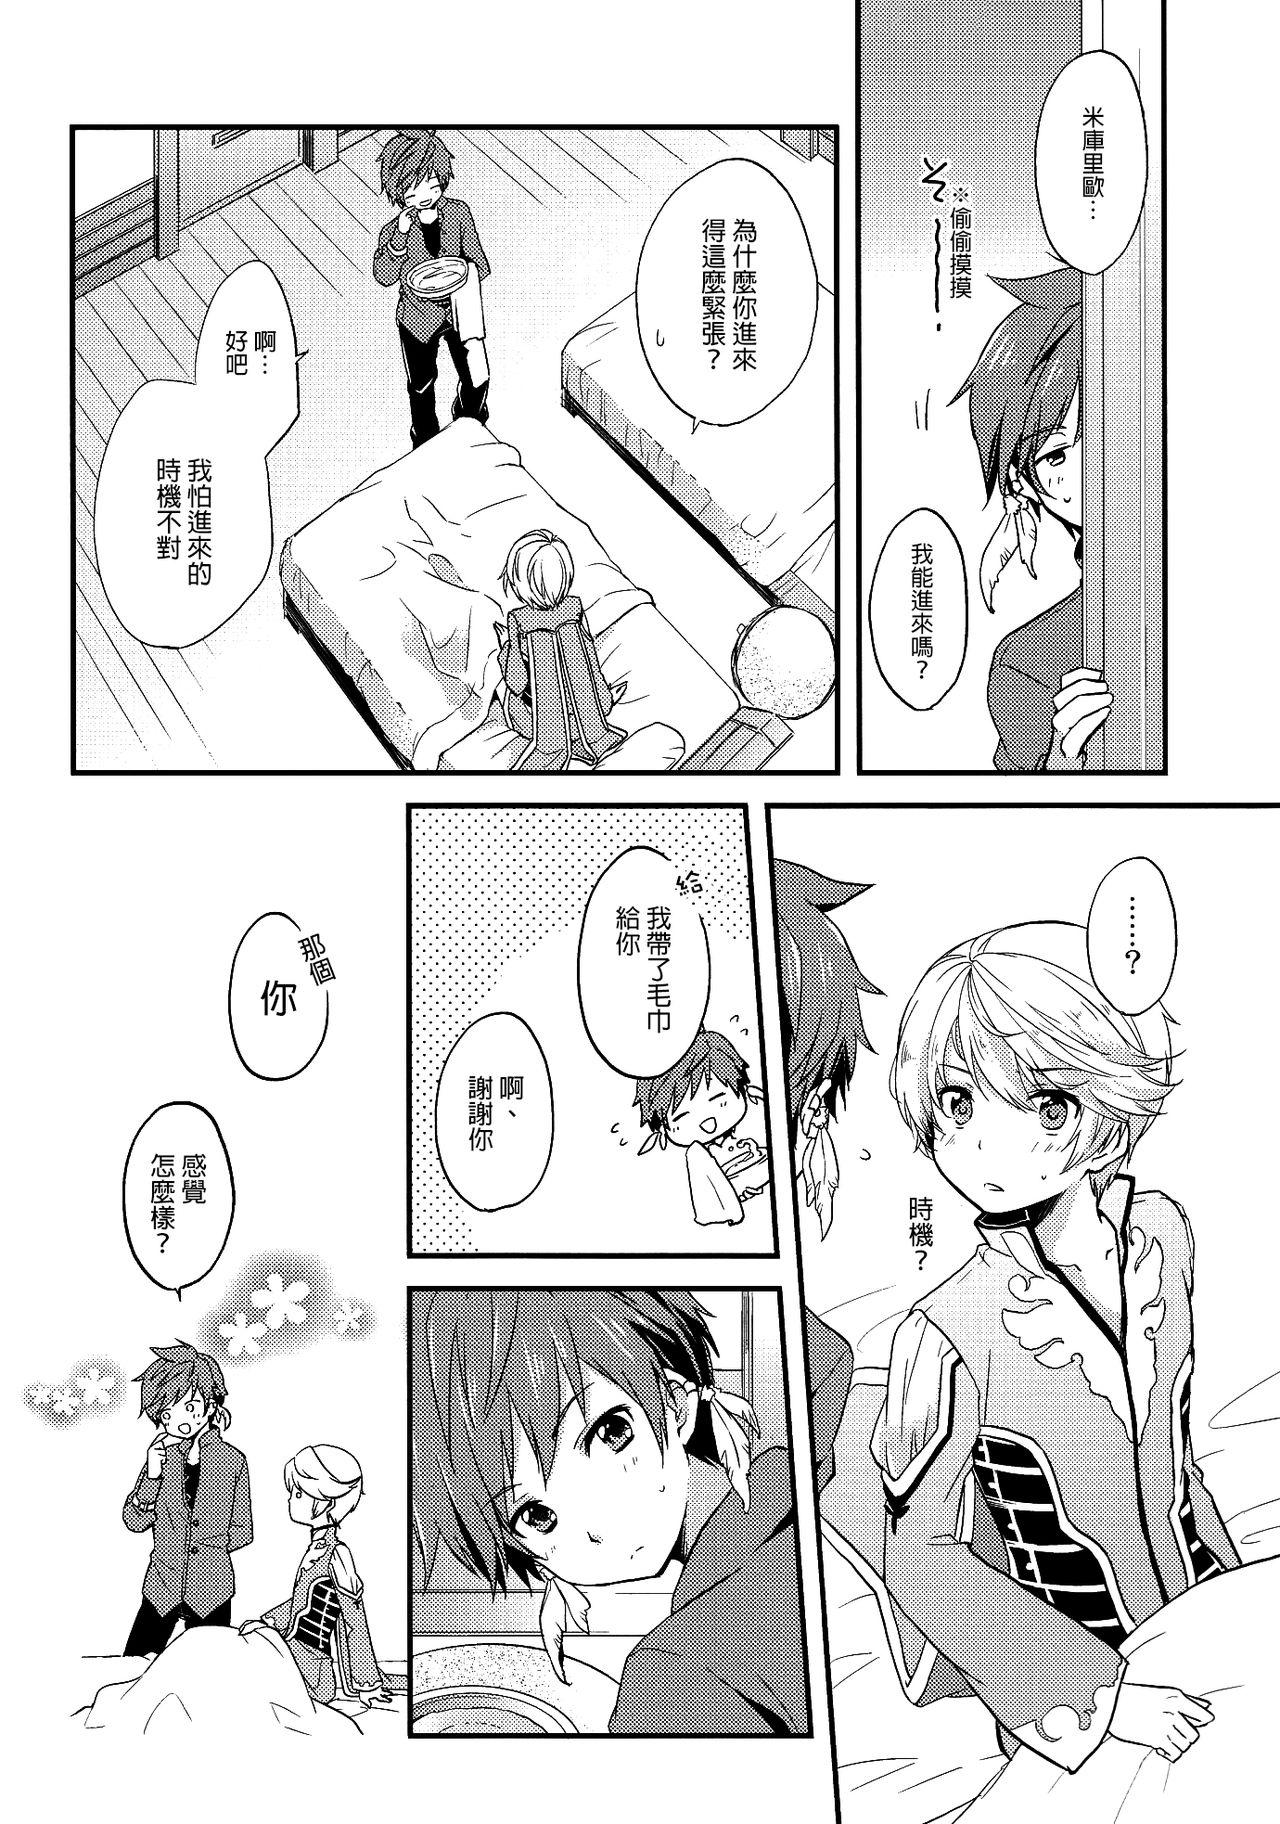 Chubby Datte Dare mo Oshiete Kurenai | That's because nobody taught me - Tales of zestiria Teen Sex - Page 6